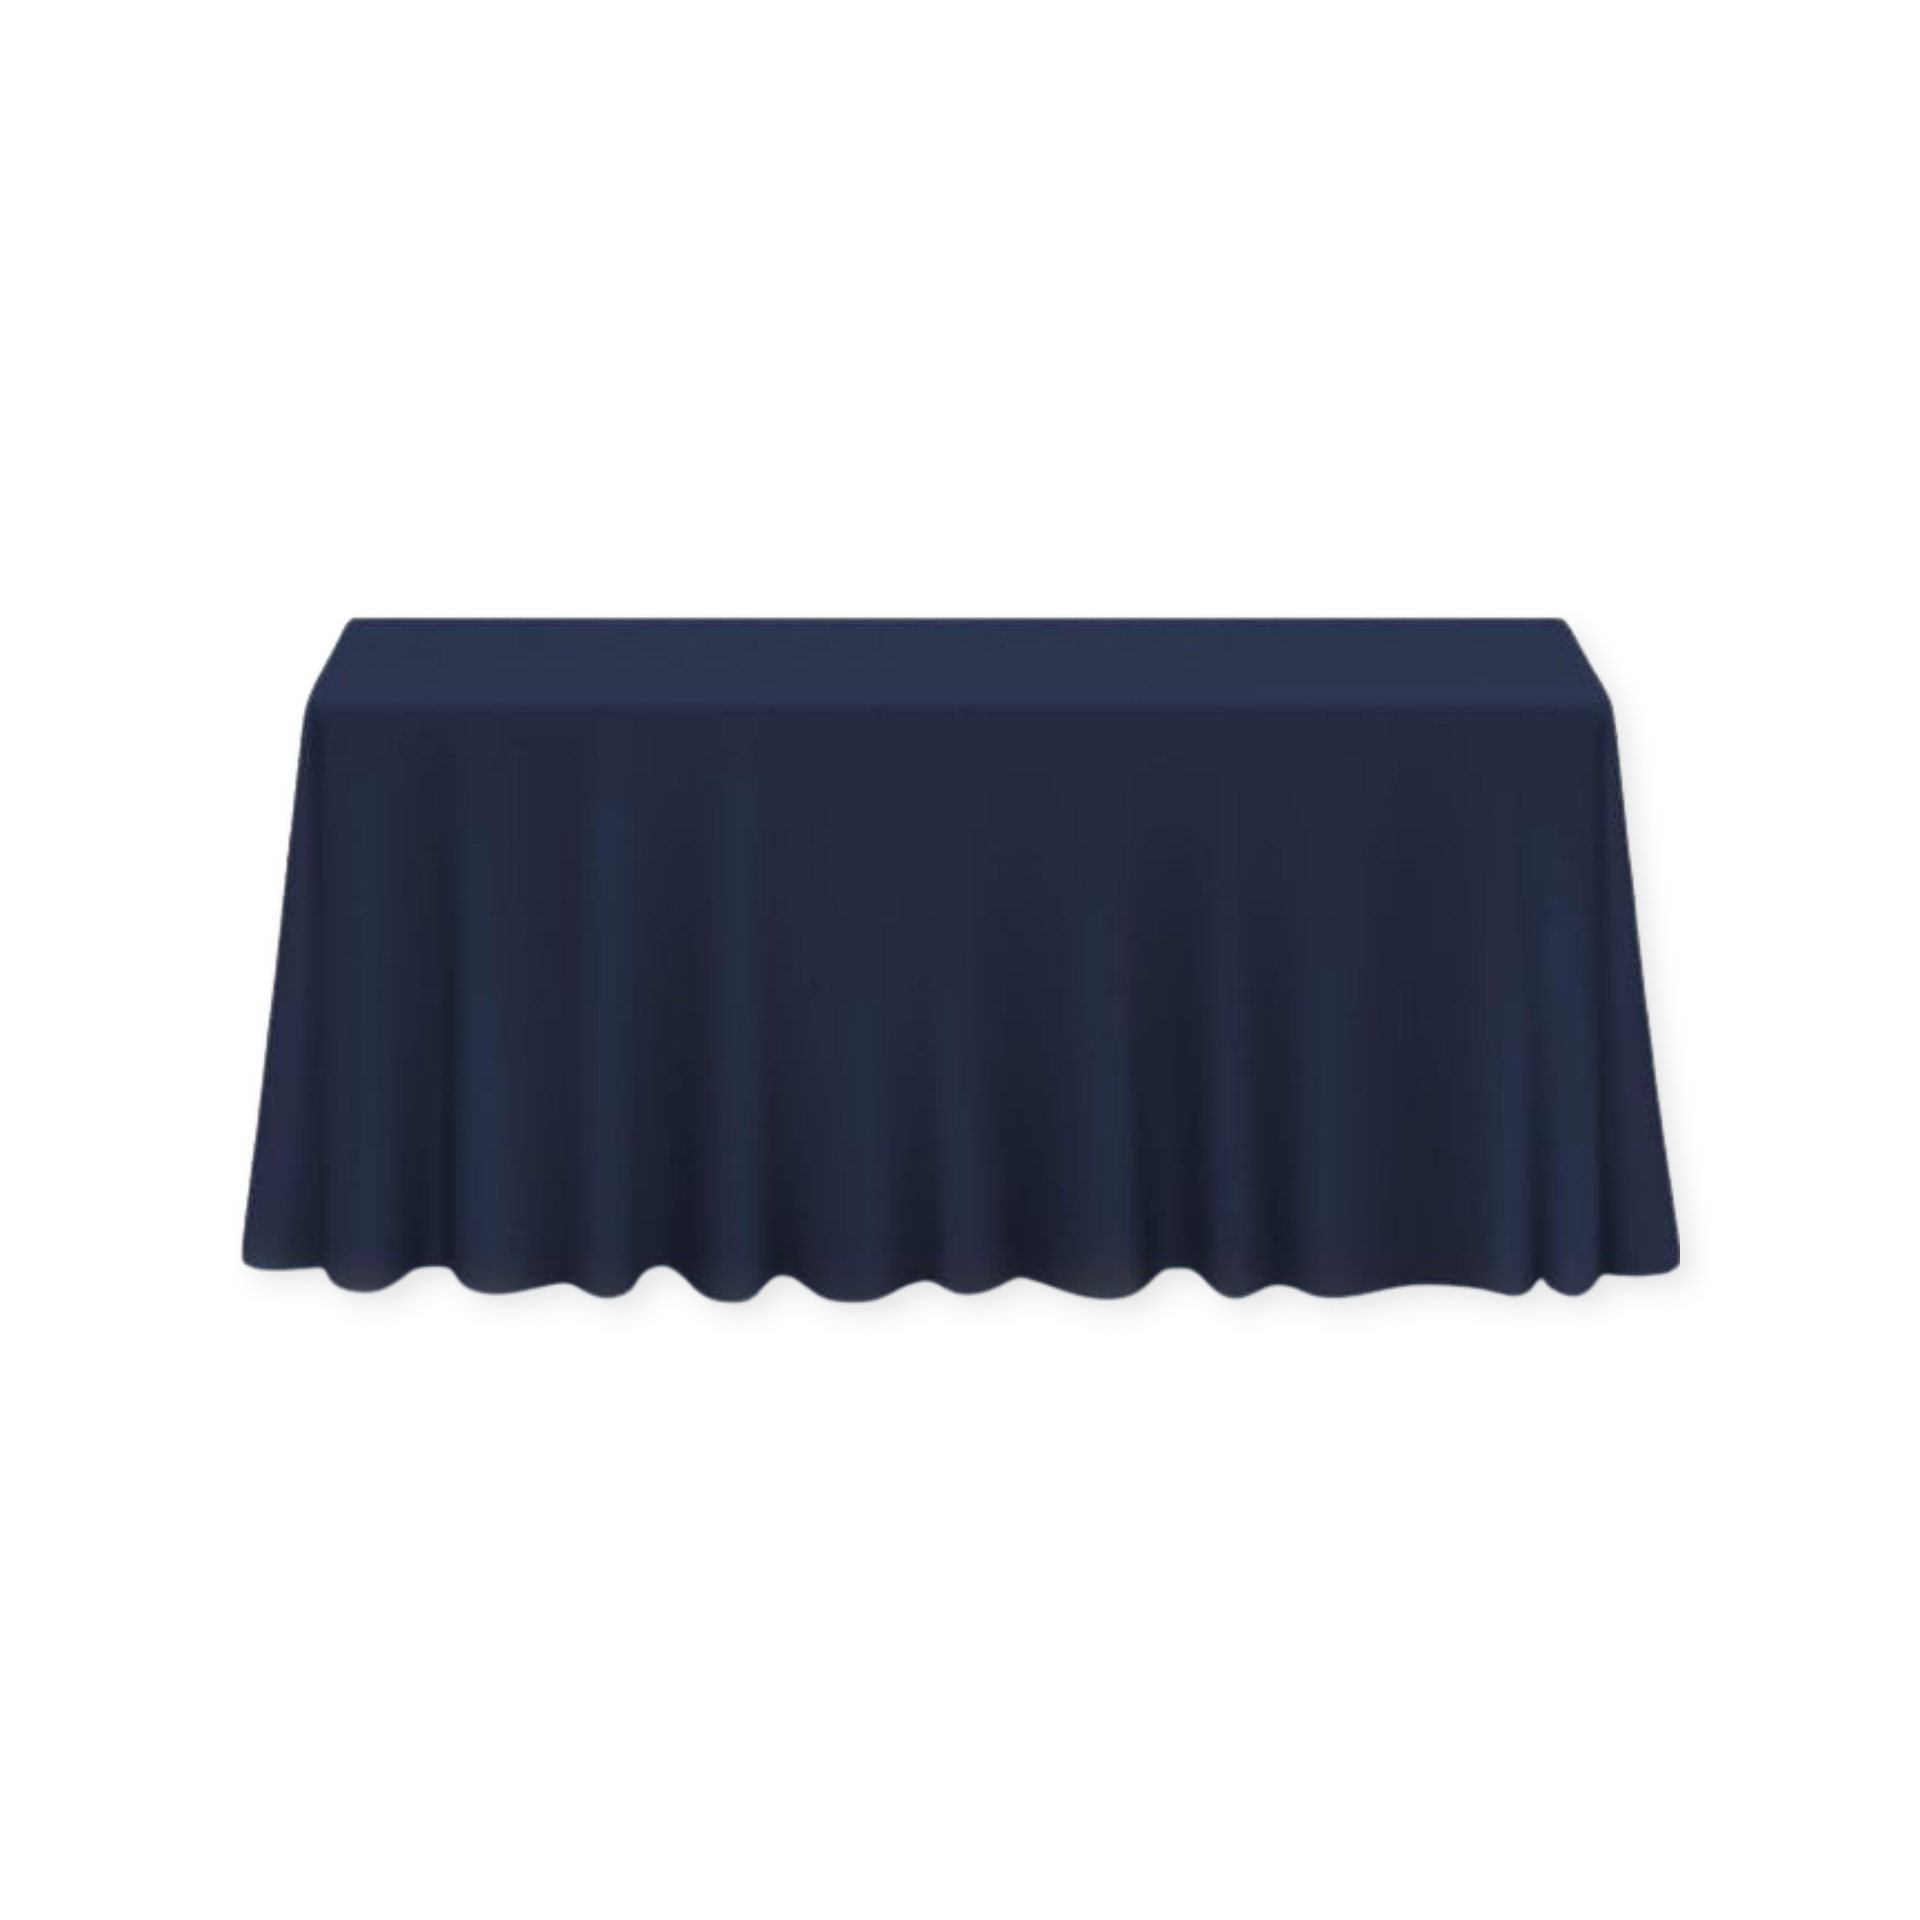 Tablecloth polyester rectangle navy blue commercial grade wedding party event rental panama city beach